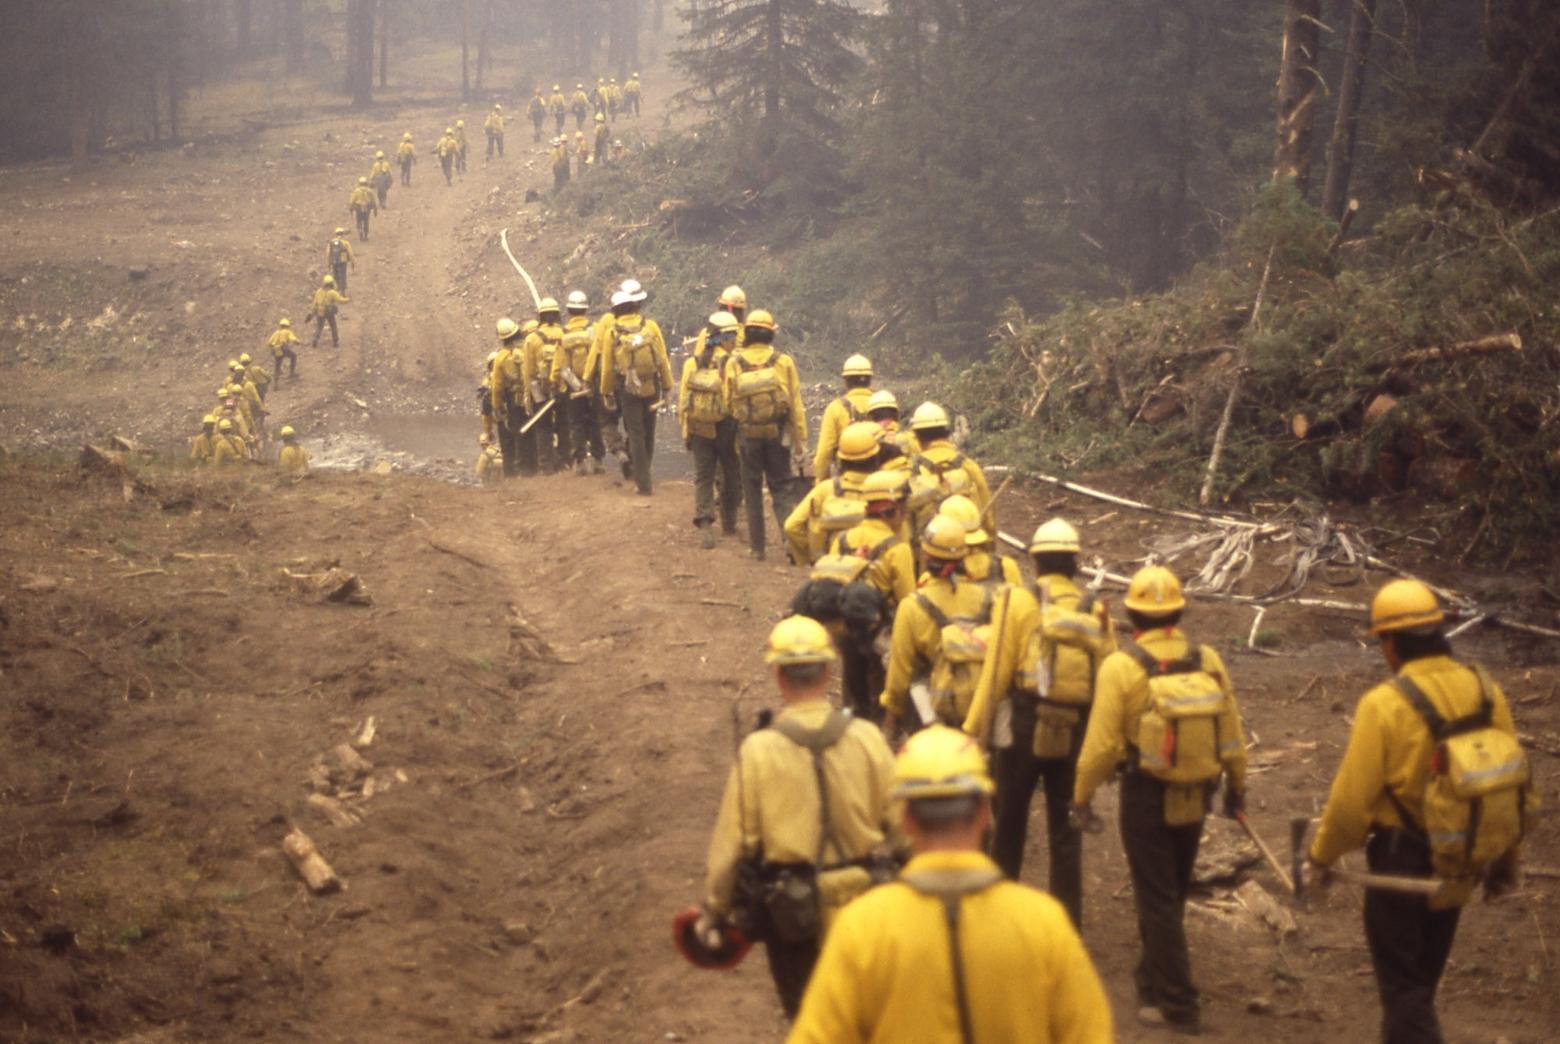 On Nov. 17, federal wildland firefighters face a pay cliff, which could cause massive workforce losses of up to 50 percent, according to the U.S. Forest Service. Here, military firefighters walk to buses near the Northeast Entrance of Yellowstone National Park during the fires of '88. Sept. 4, 1988. Photo by Jim Peaco/NPS